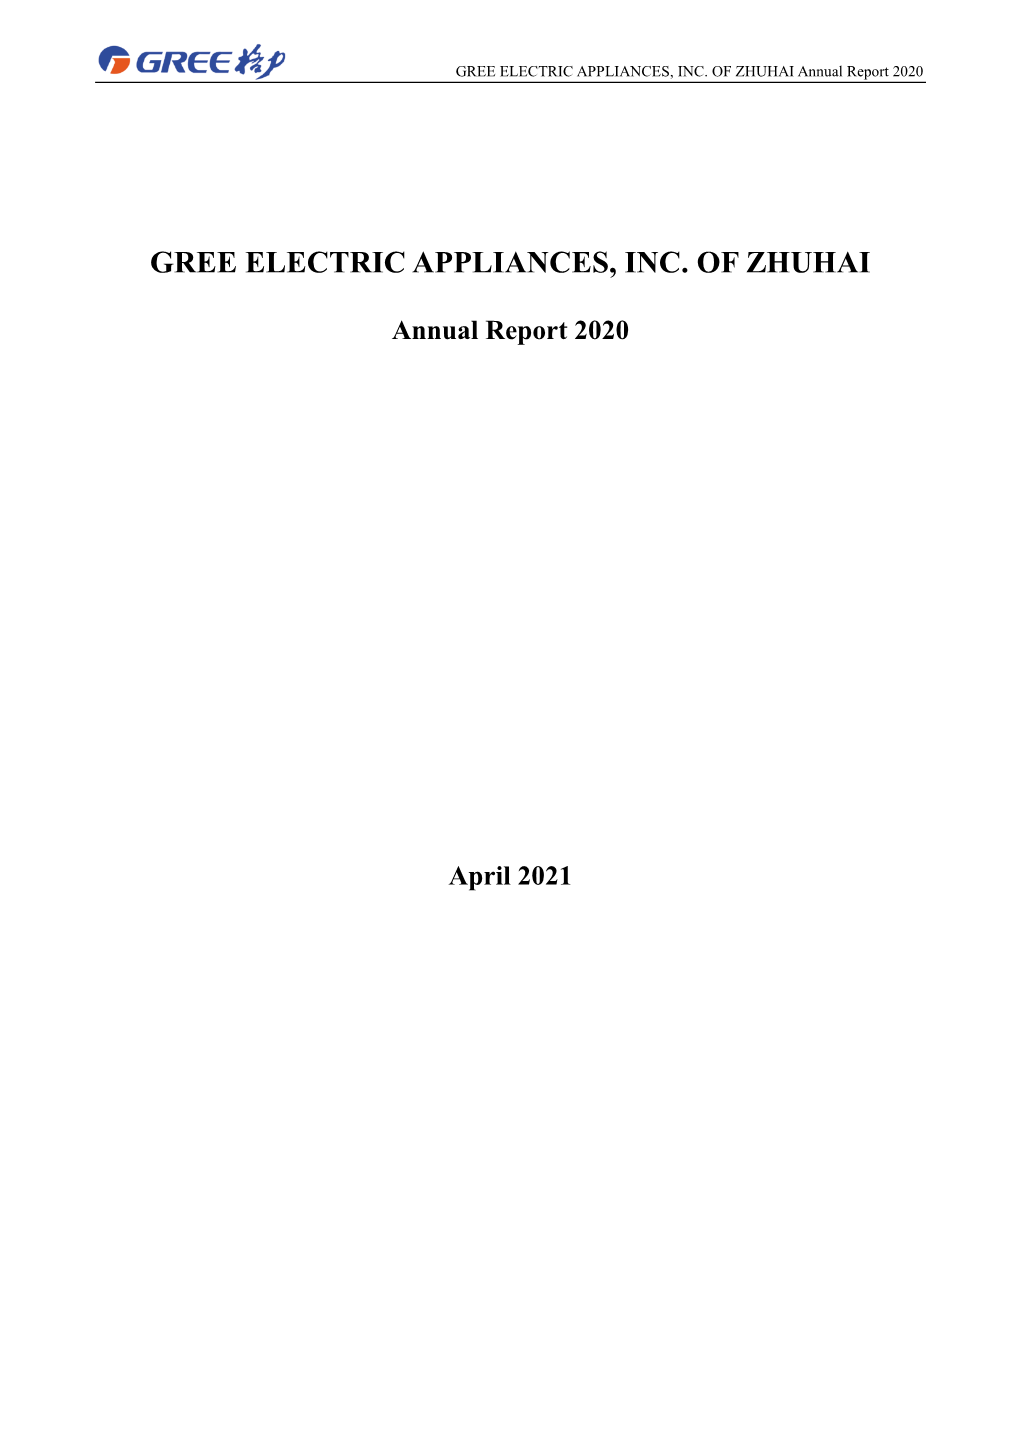 GREE ELECTRIC APPLIANCES, INC. of ZHUHAI Annual Report 2020